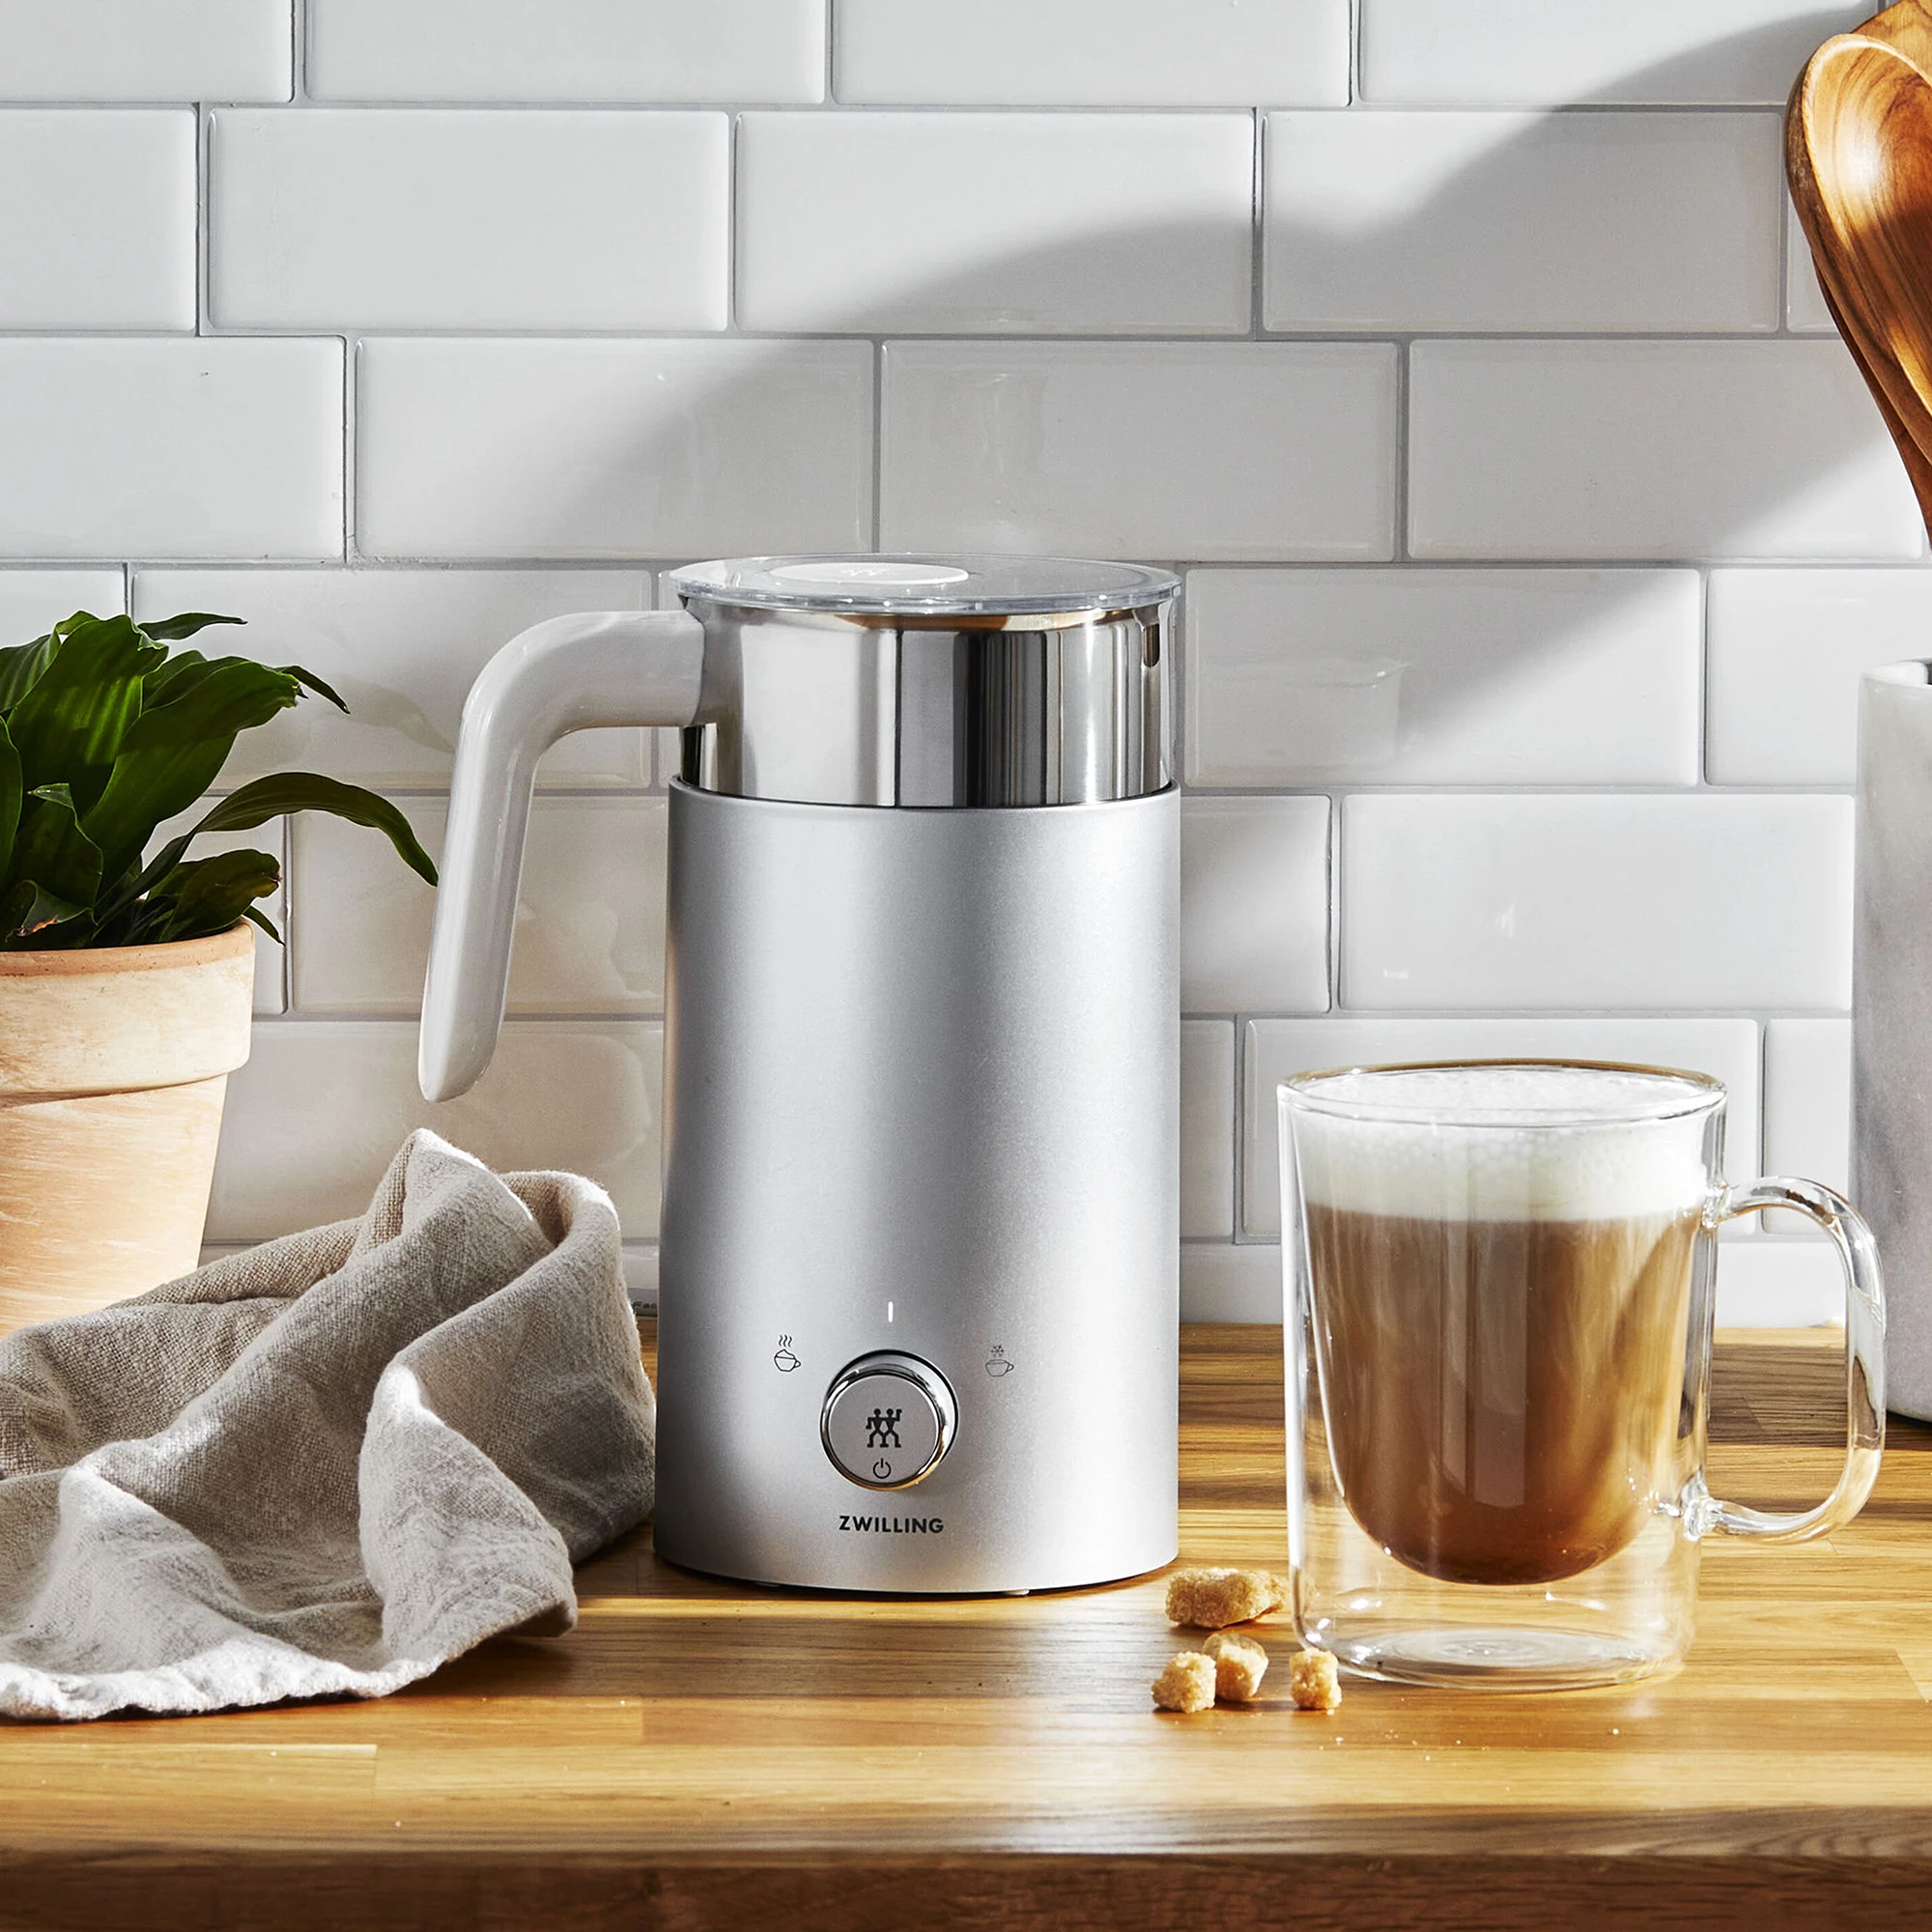 https://www.homethreads.com/files/zwilling/1010585-zwilling-enfinigy-milk-frother-silver-7.webp